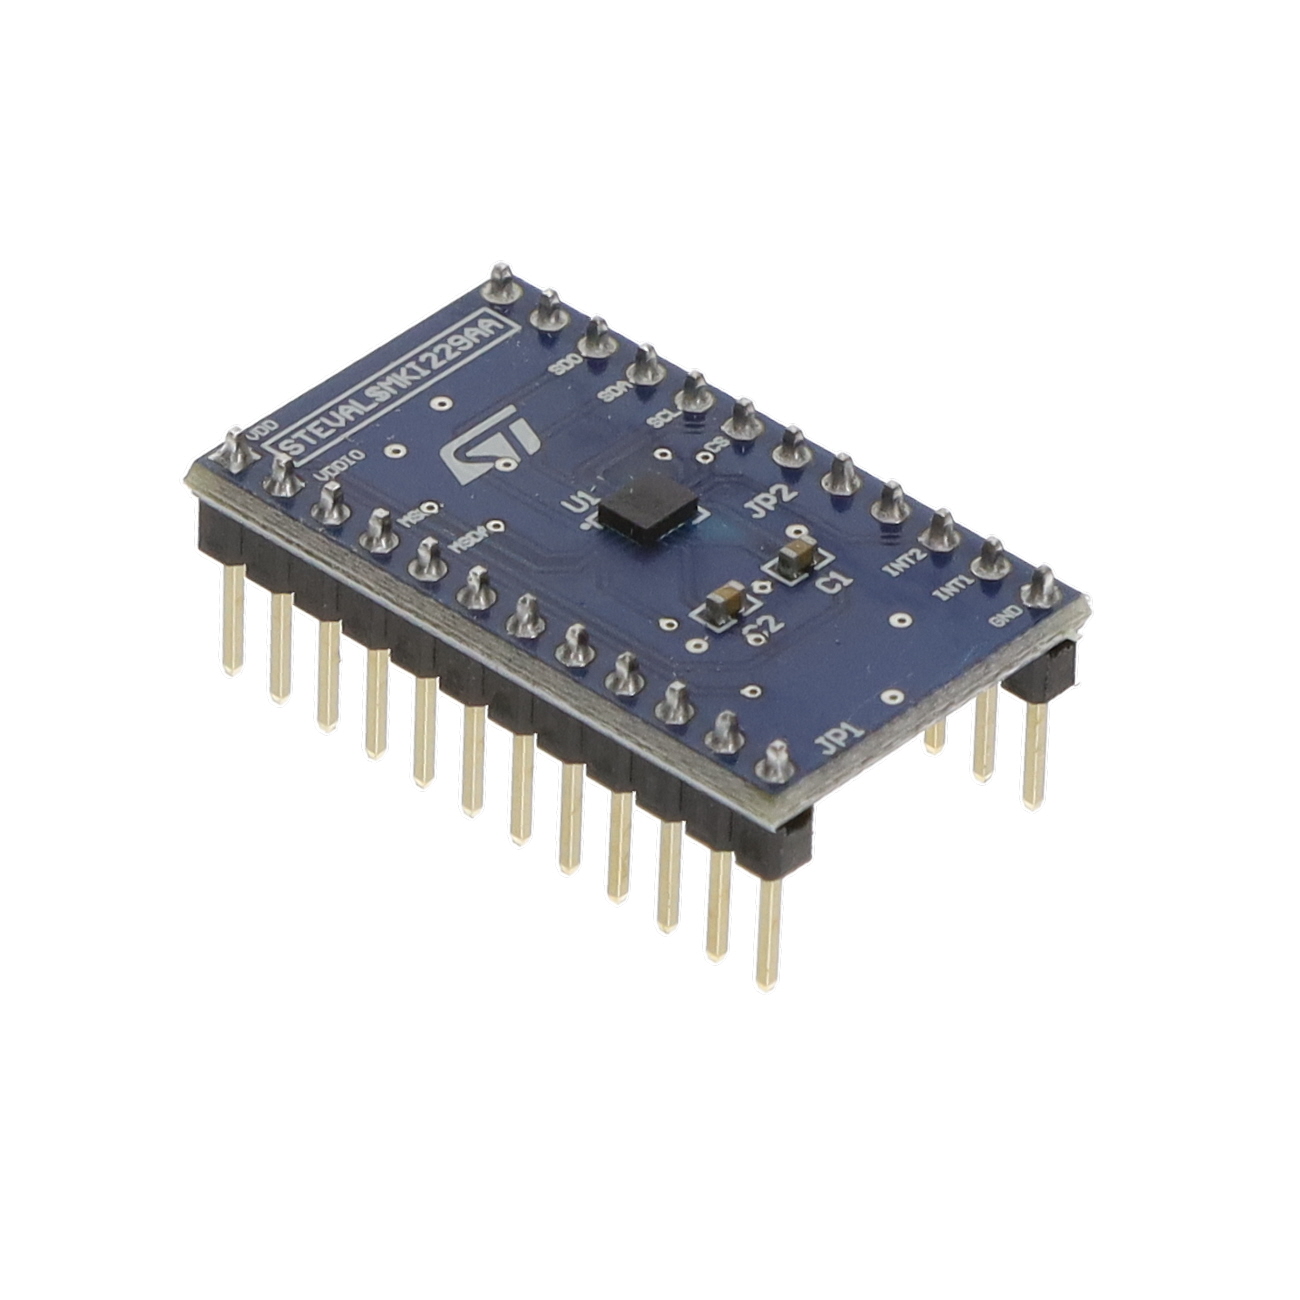 【STEVAL-MKI229A】DIL24 ADAPTER BOARD LSM6DSO16IS